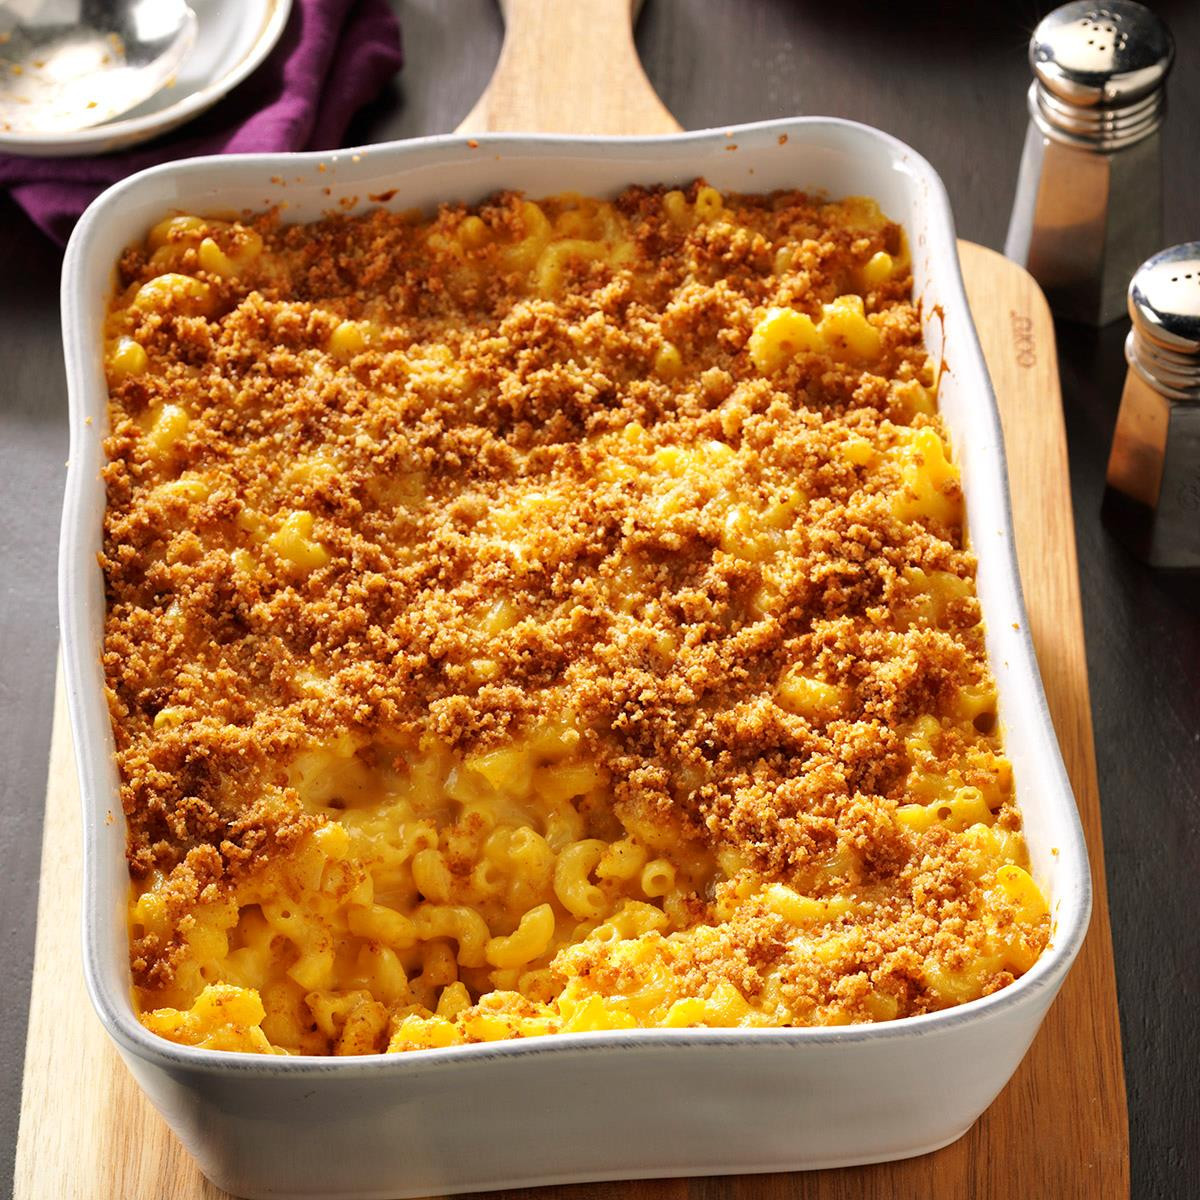 Simple Baked Macaroni And Cheese Recipe
 Baked Mac and Cheese Recipe